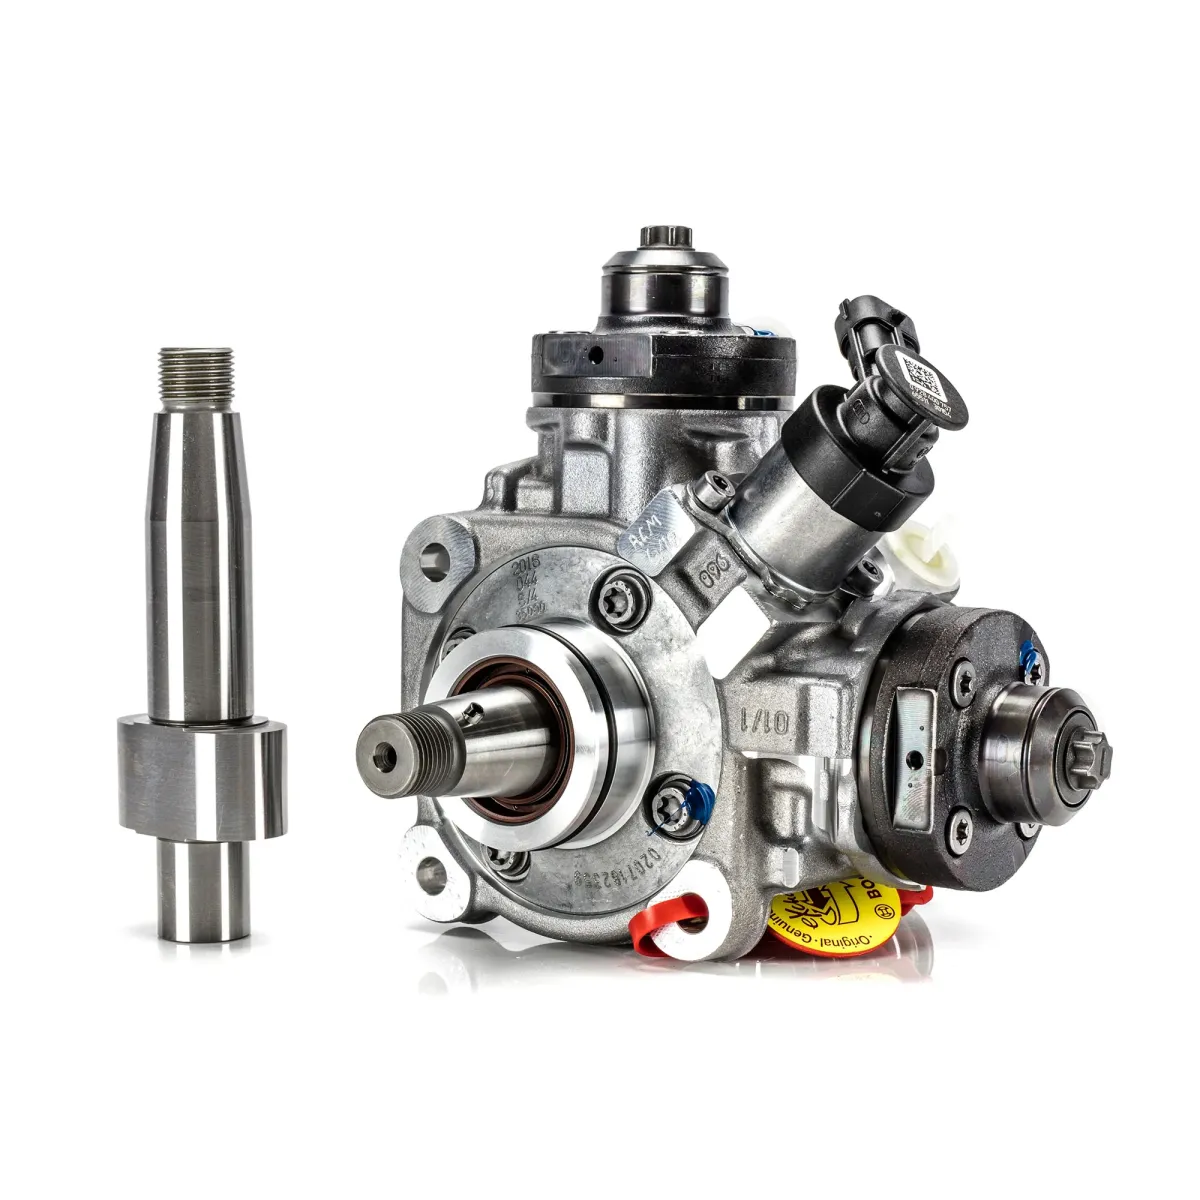 River City Diesel - RCD Performance 2011- 2019 6.7L Ford Powerstroke CPX Fuel Injection Pump +10% Up to 650hp